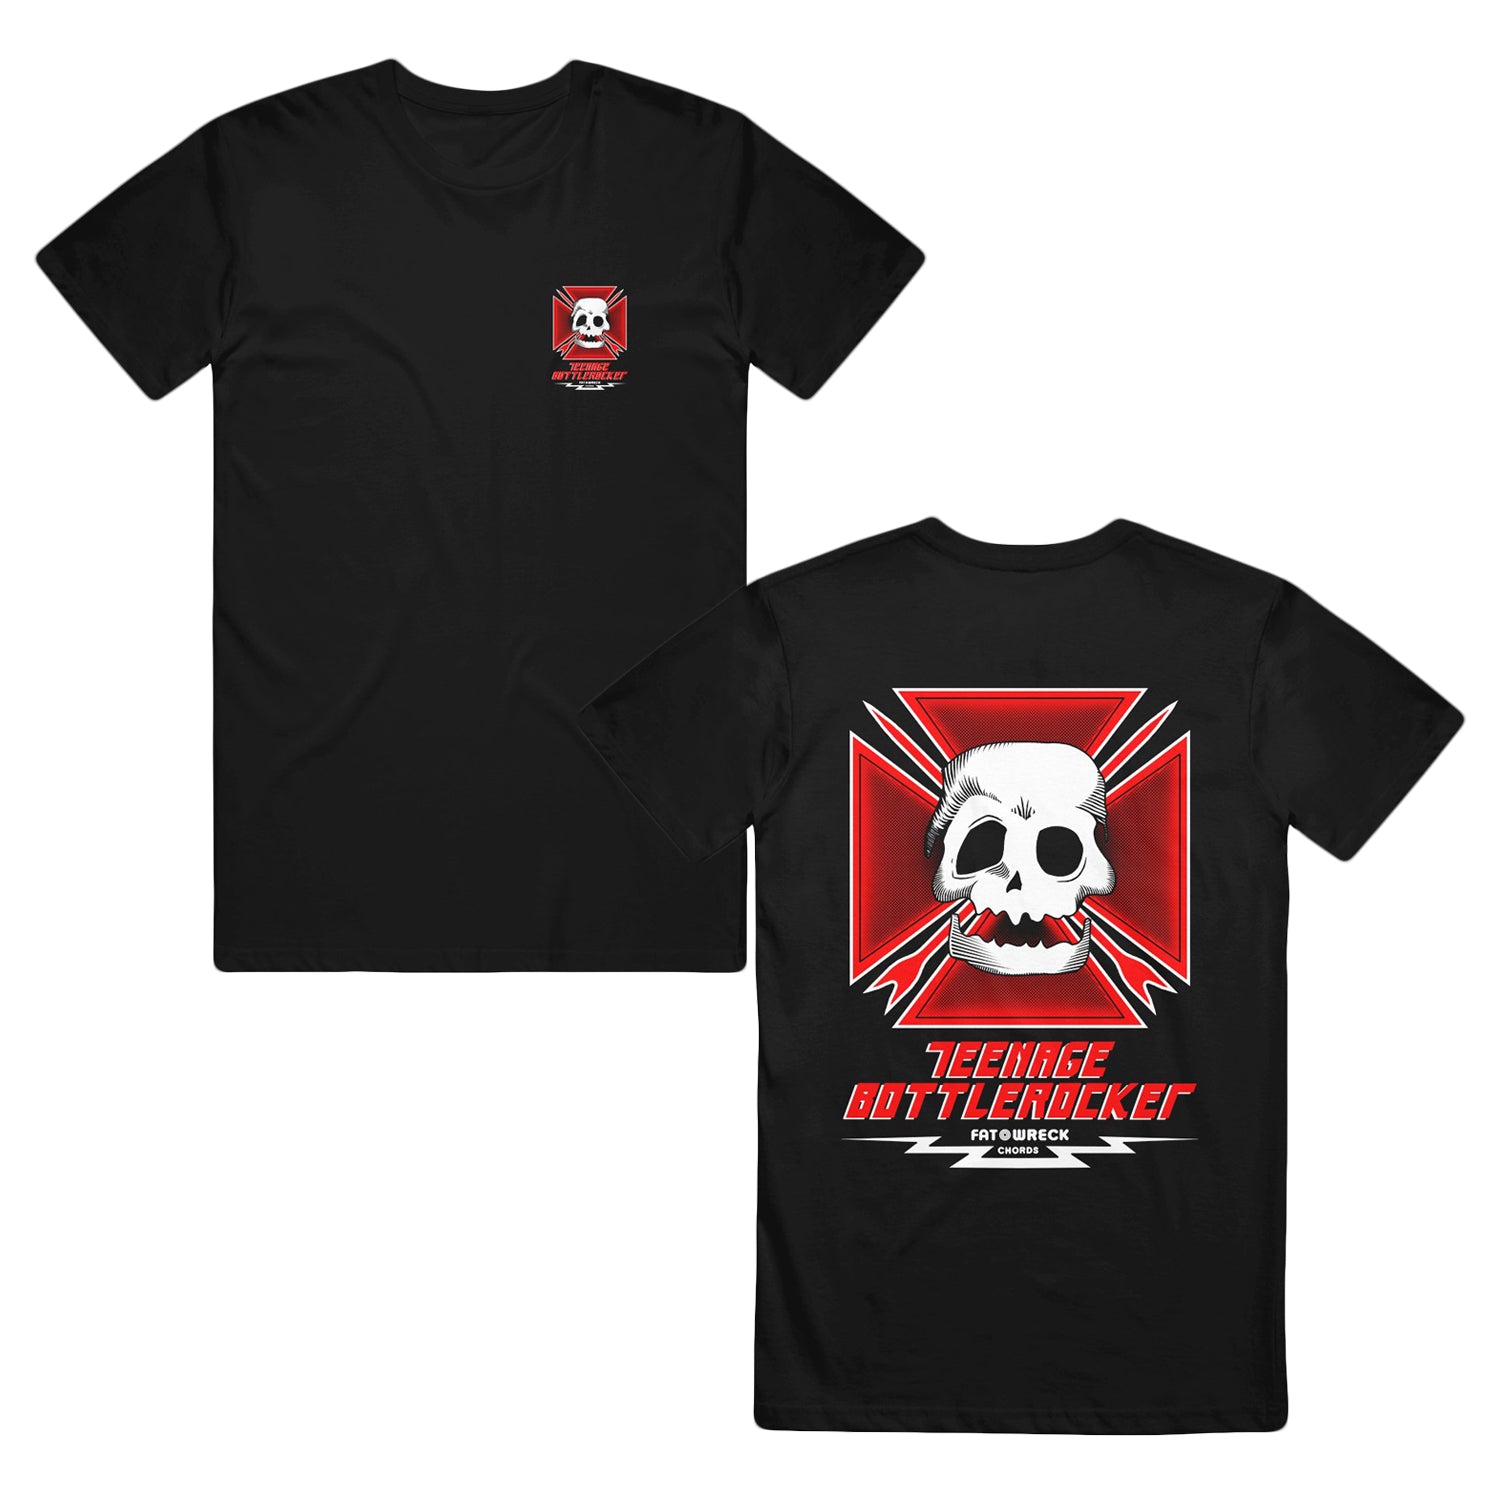 Image of the front and back of a black shirt against a white background. The left chest of the shirt features four red triangles with their top point all facing to the center, where there is a white skull head with red cross arrows on top of the triangles. Below this in red text it says teenage bottle rocket. below that in white text it says fat wreck chords. The back of the shirt features the same image, only larger and in the center of the shirt.